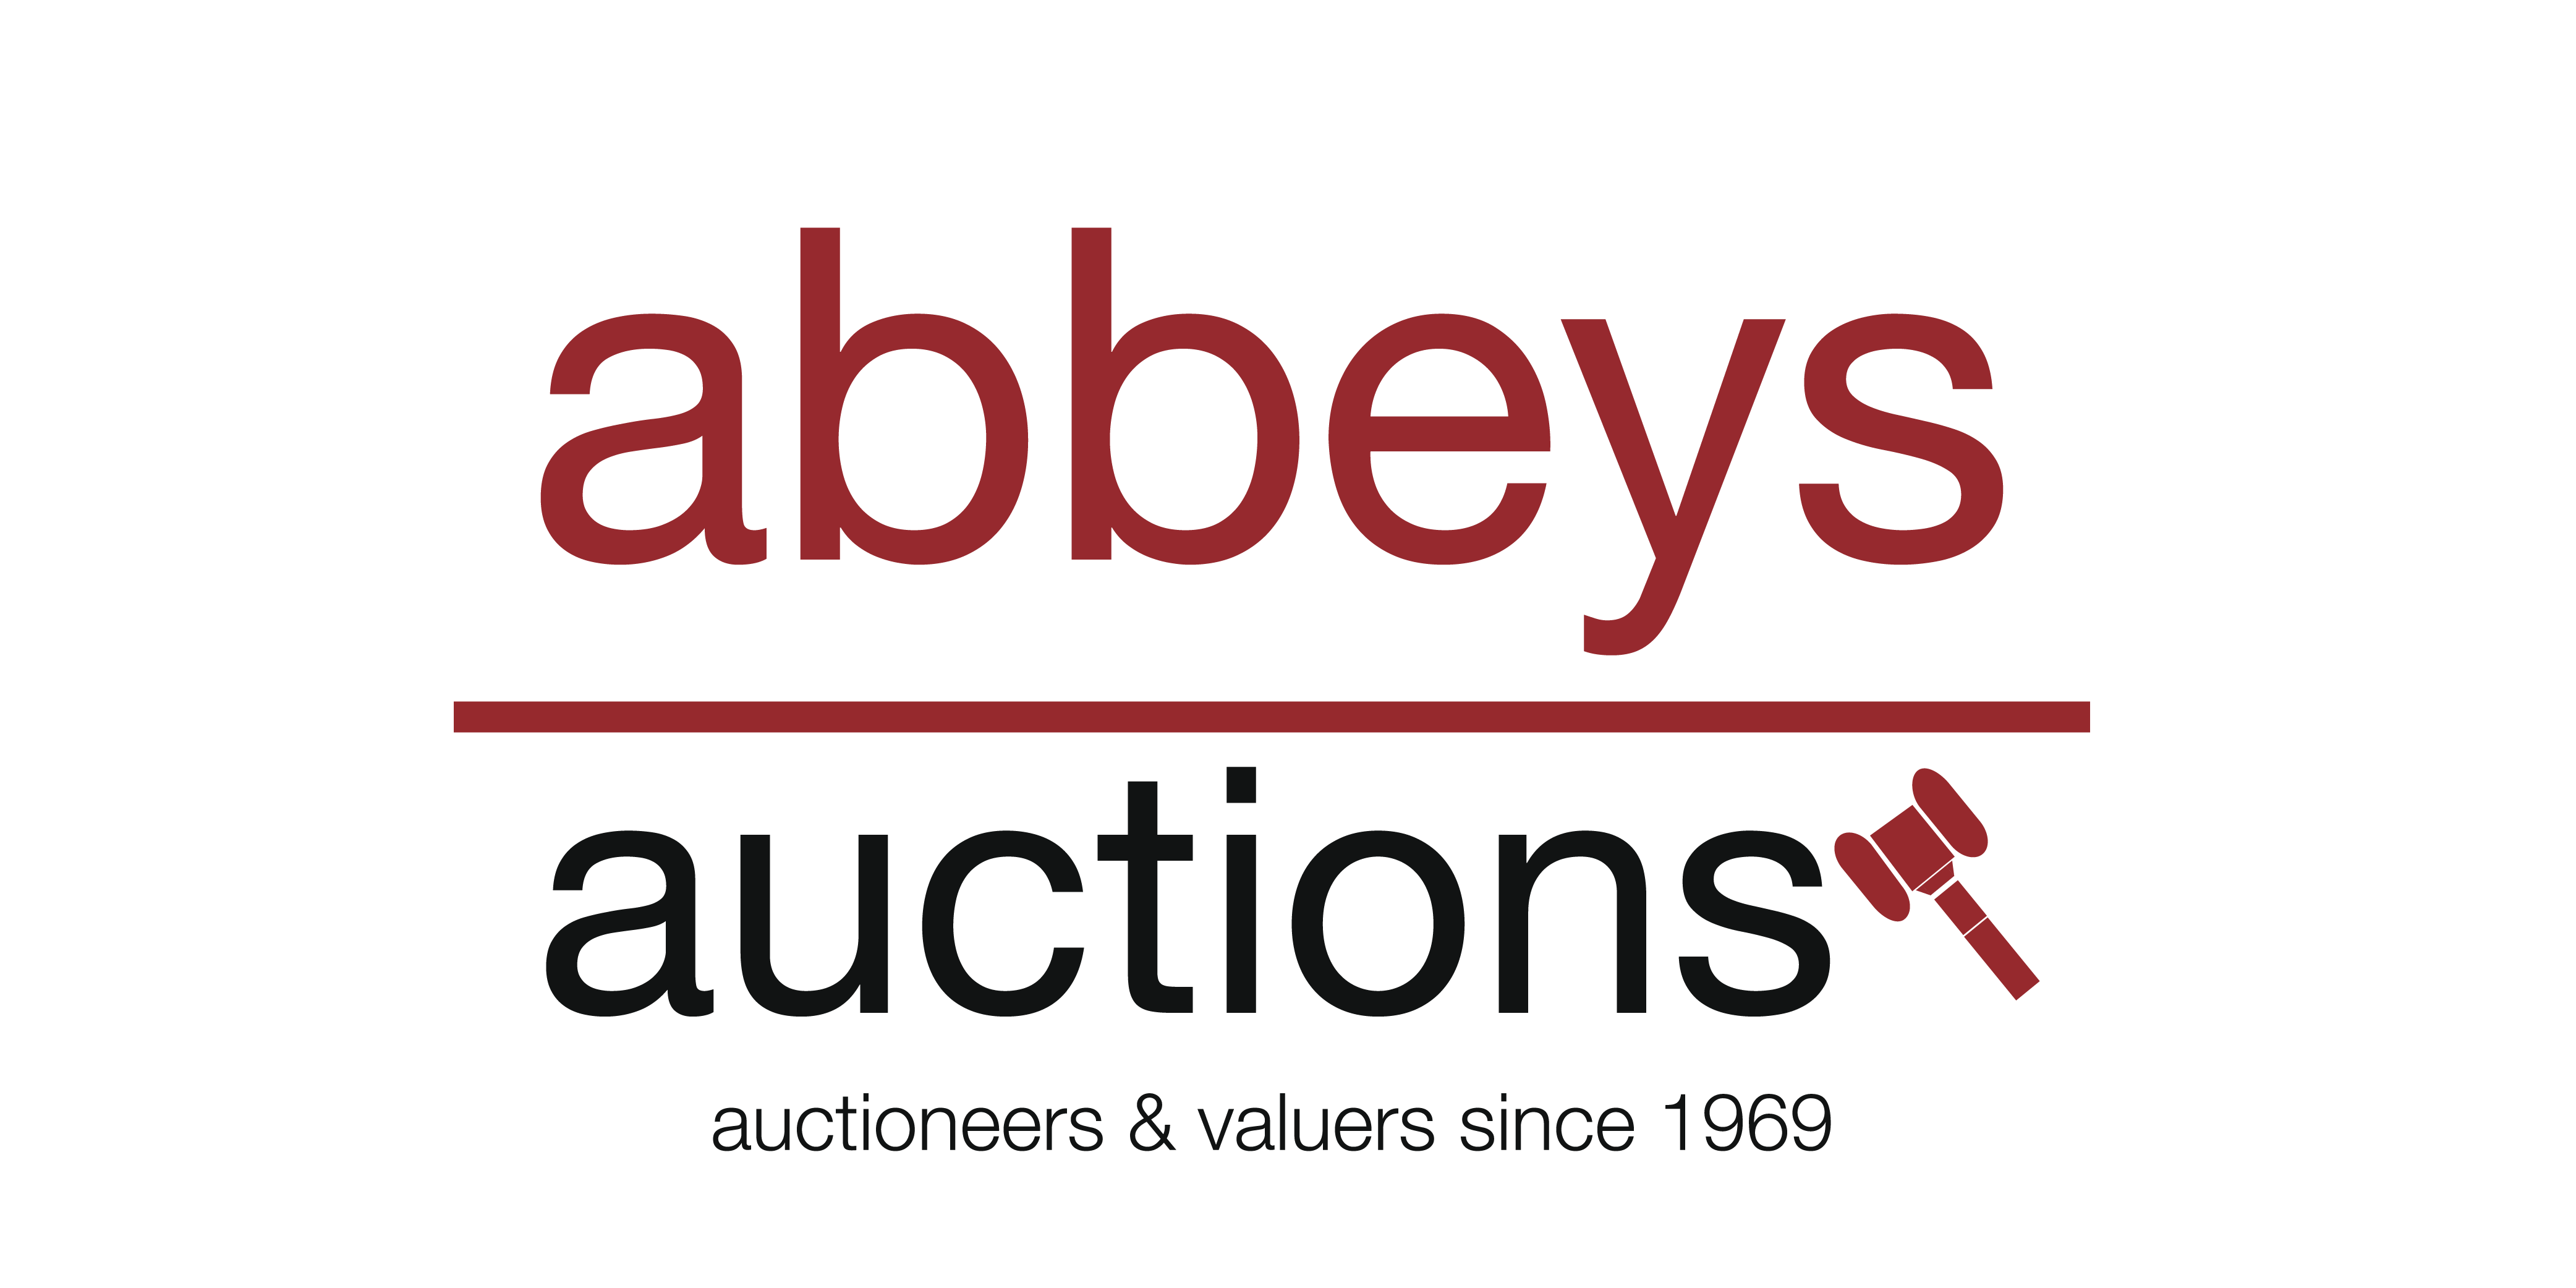 Household Goods Logo - Friday Household Goods Auctions - Abbeys Auctions